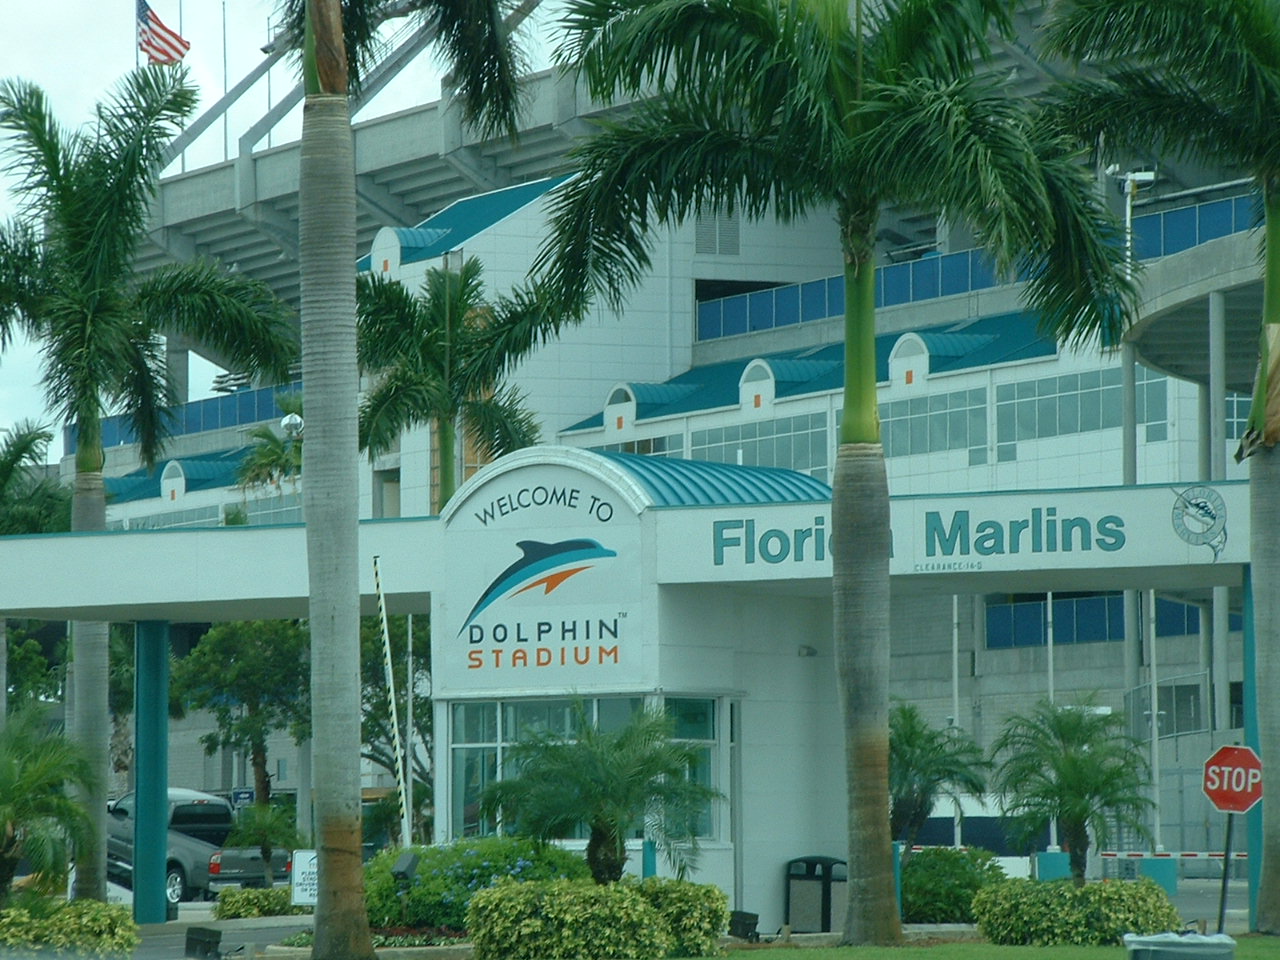 Since Fort Lauderdale is so close to Miami, we had to go to Dolphin Stadium!